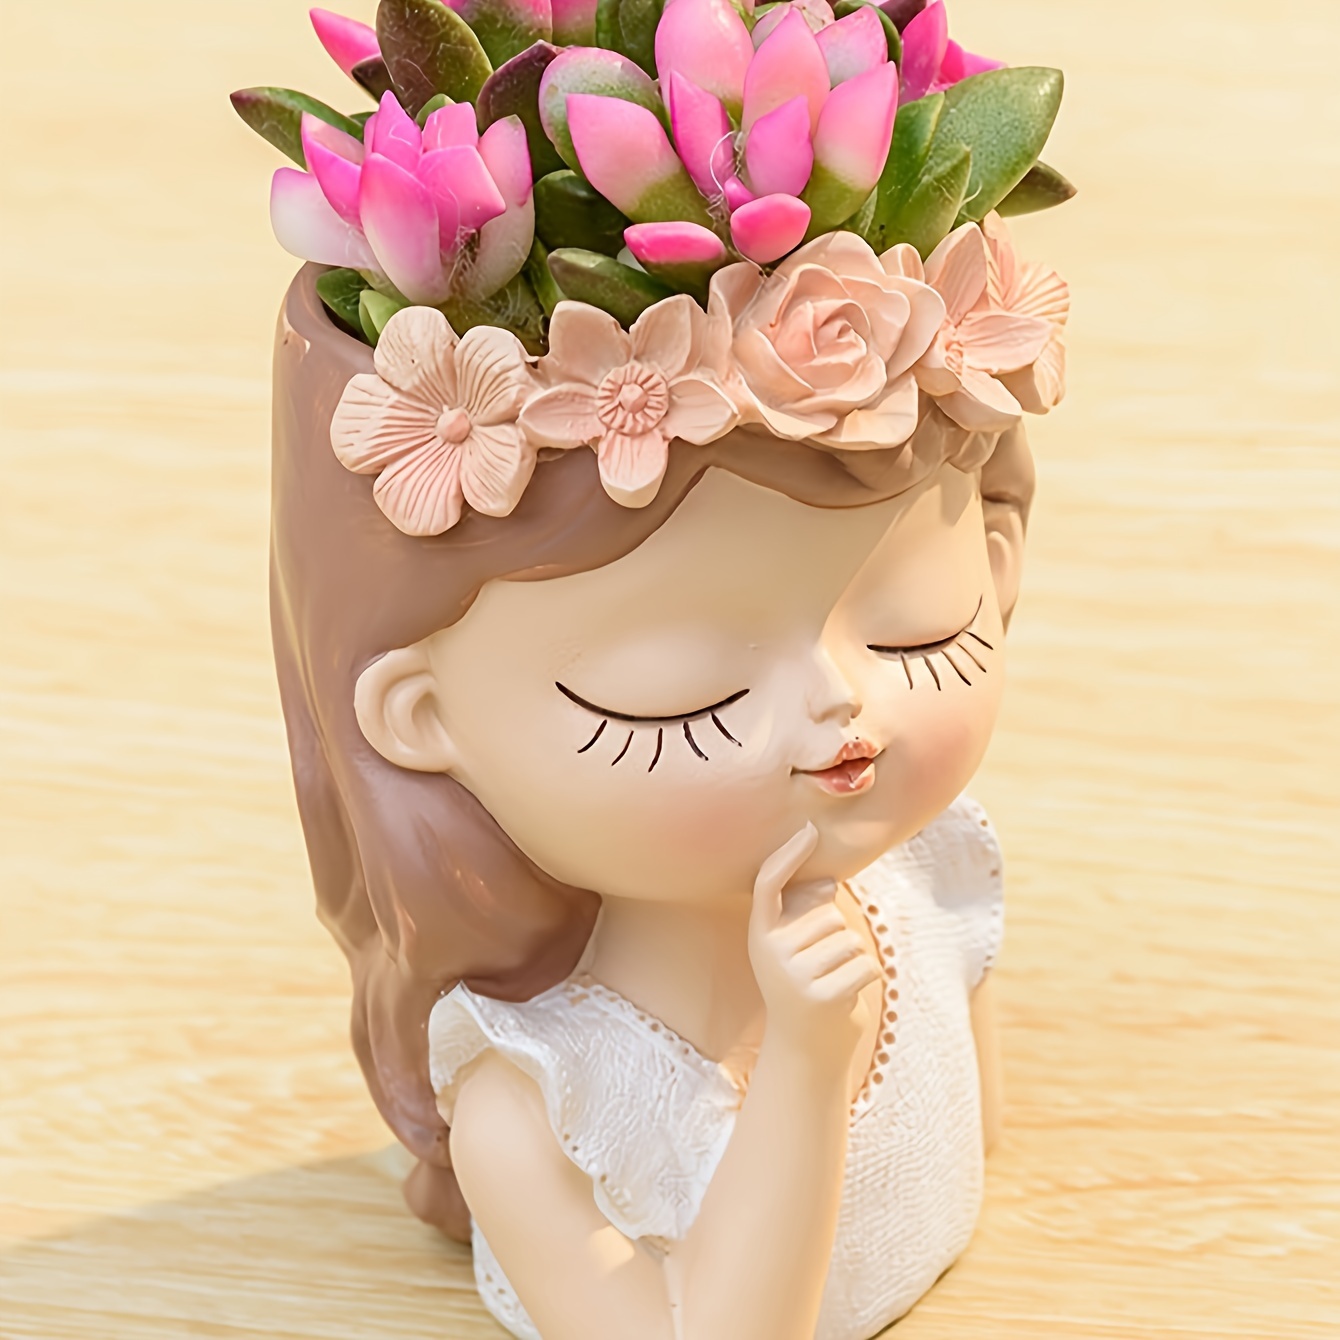 

1pc, Fairy Resin Planter, Cute Flower Vase Decor, Plant Pot With Floral Crown, Tabletop Decor, Home Decor, Room Decor, Whimsical Indoor Garden Accessory